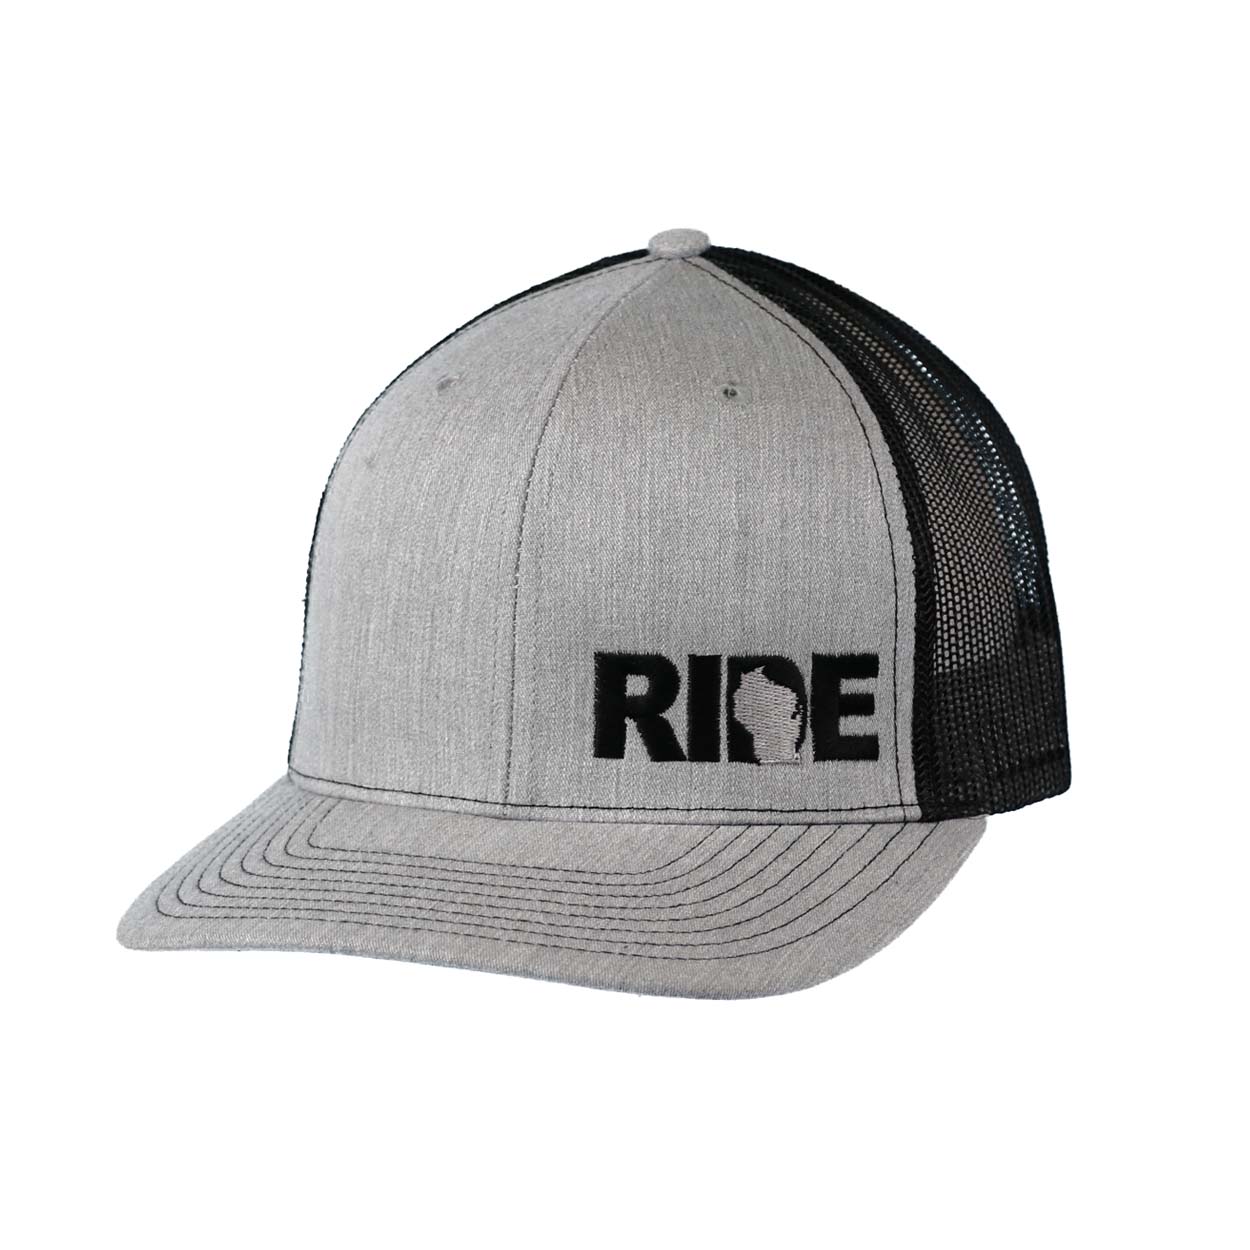 Ride Wisconsin Classic Pro Night Out Embroidered Snapback Trucker Hat Heather Gray/Black